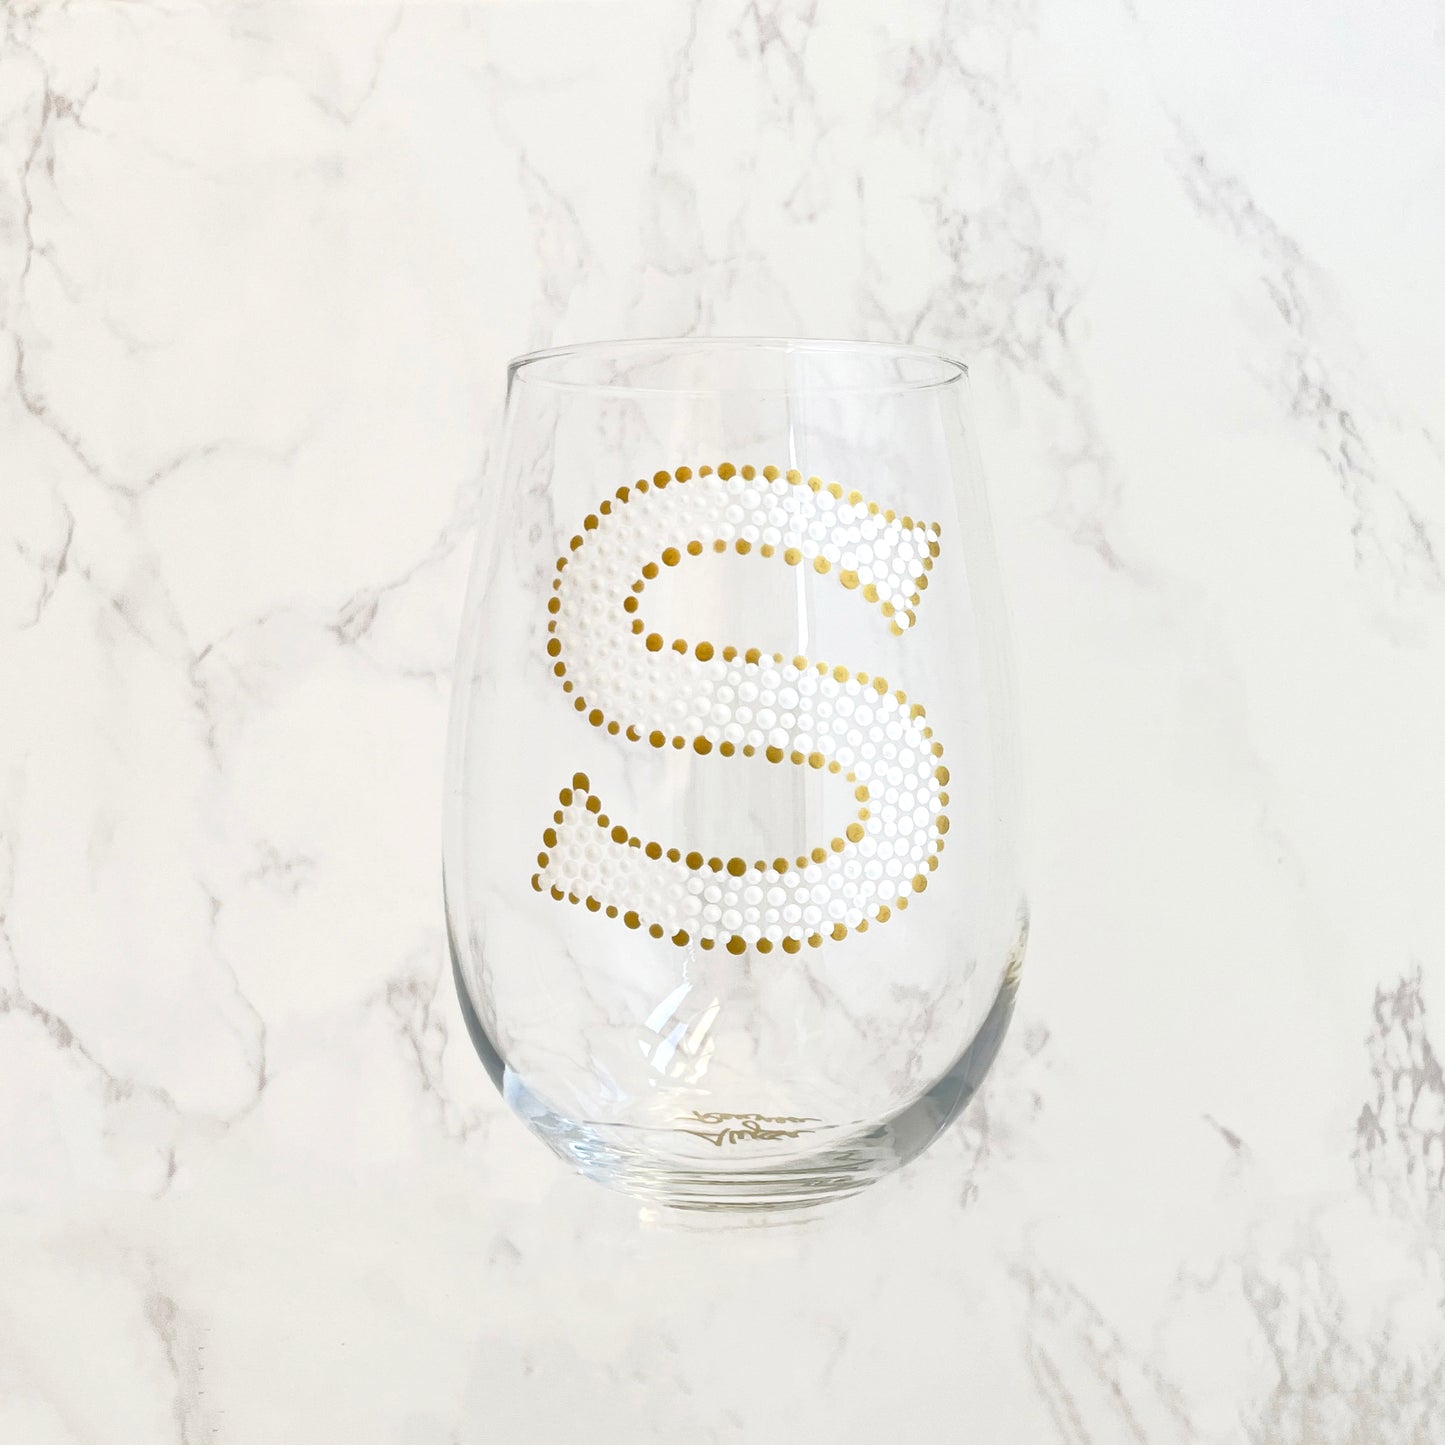 Personalized Wine Glass with Hand Painted Monogram Initial in White & Gold, One of a Kind Handmade Gift